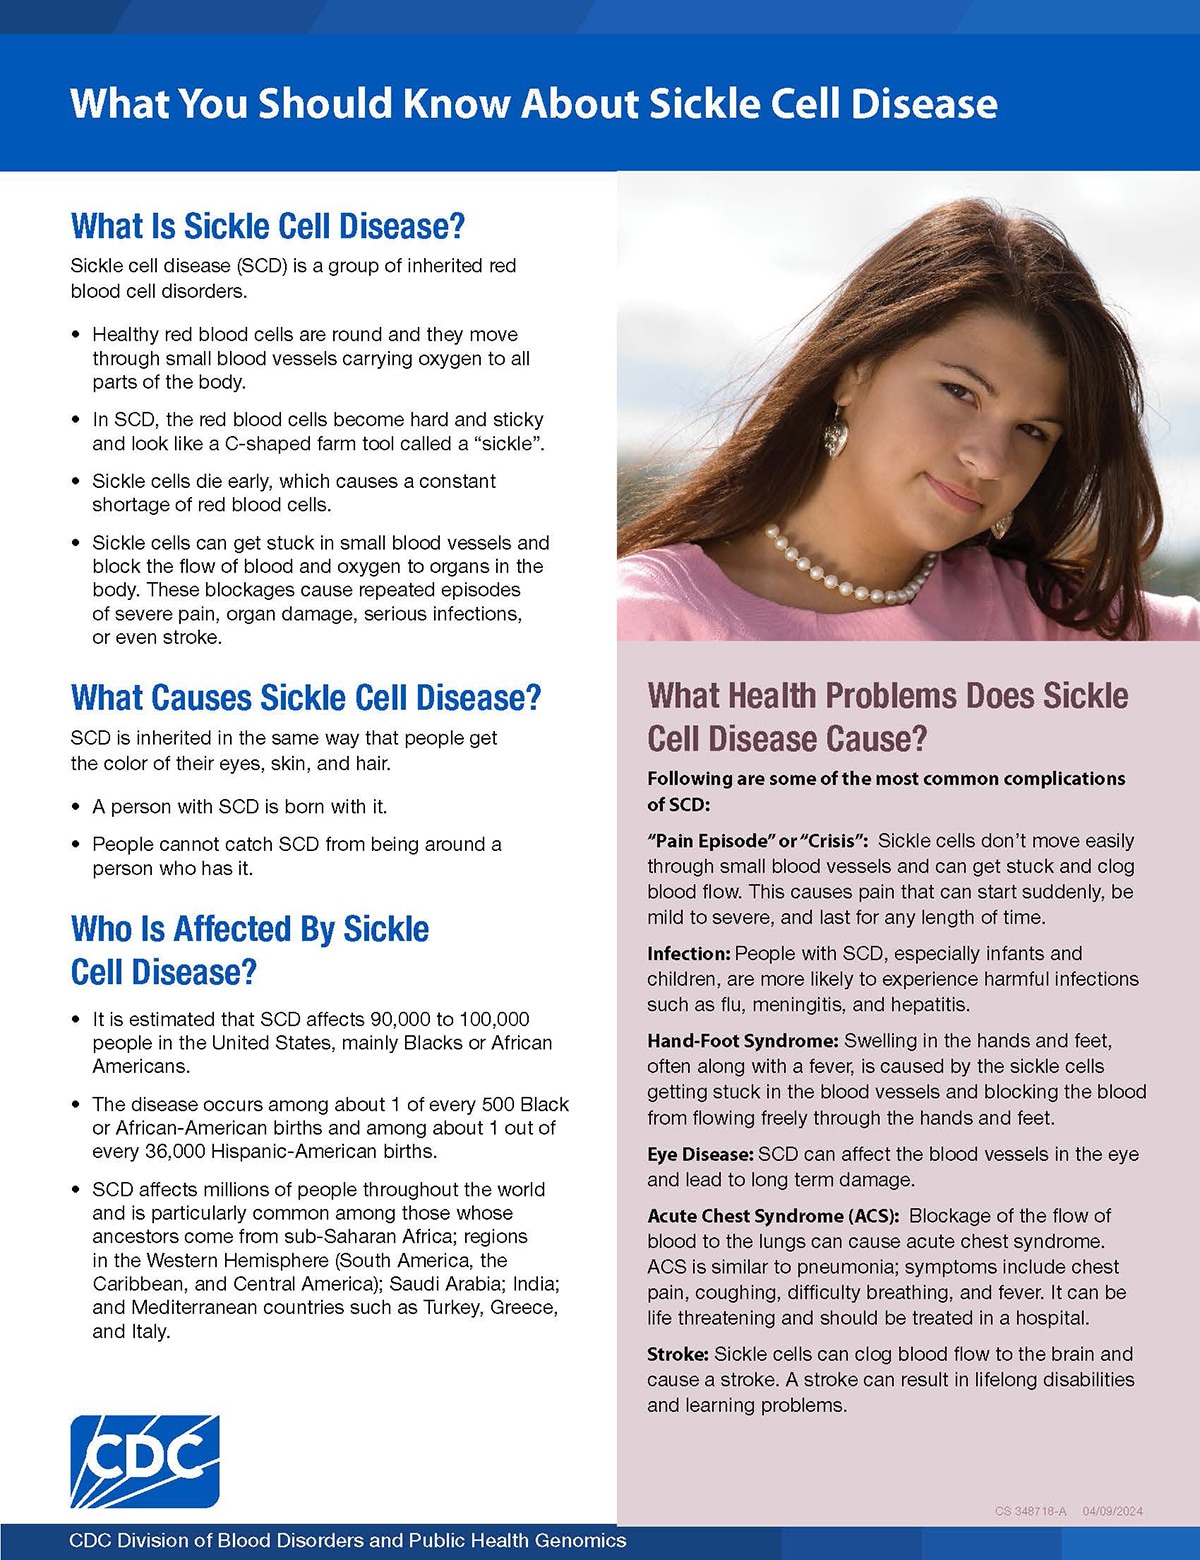 What You Should Know about Sickle Cell Disease fact sheet